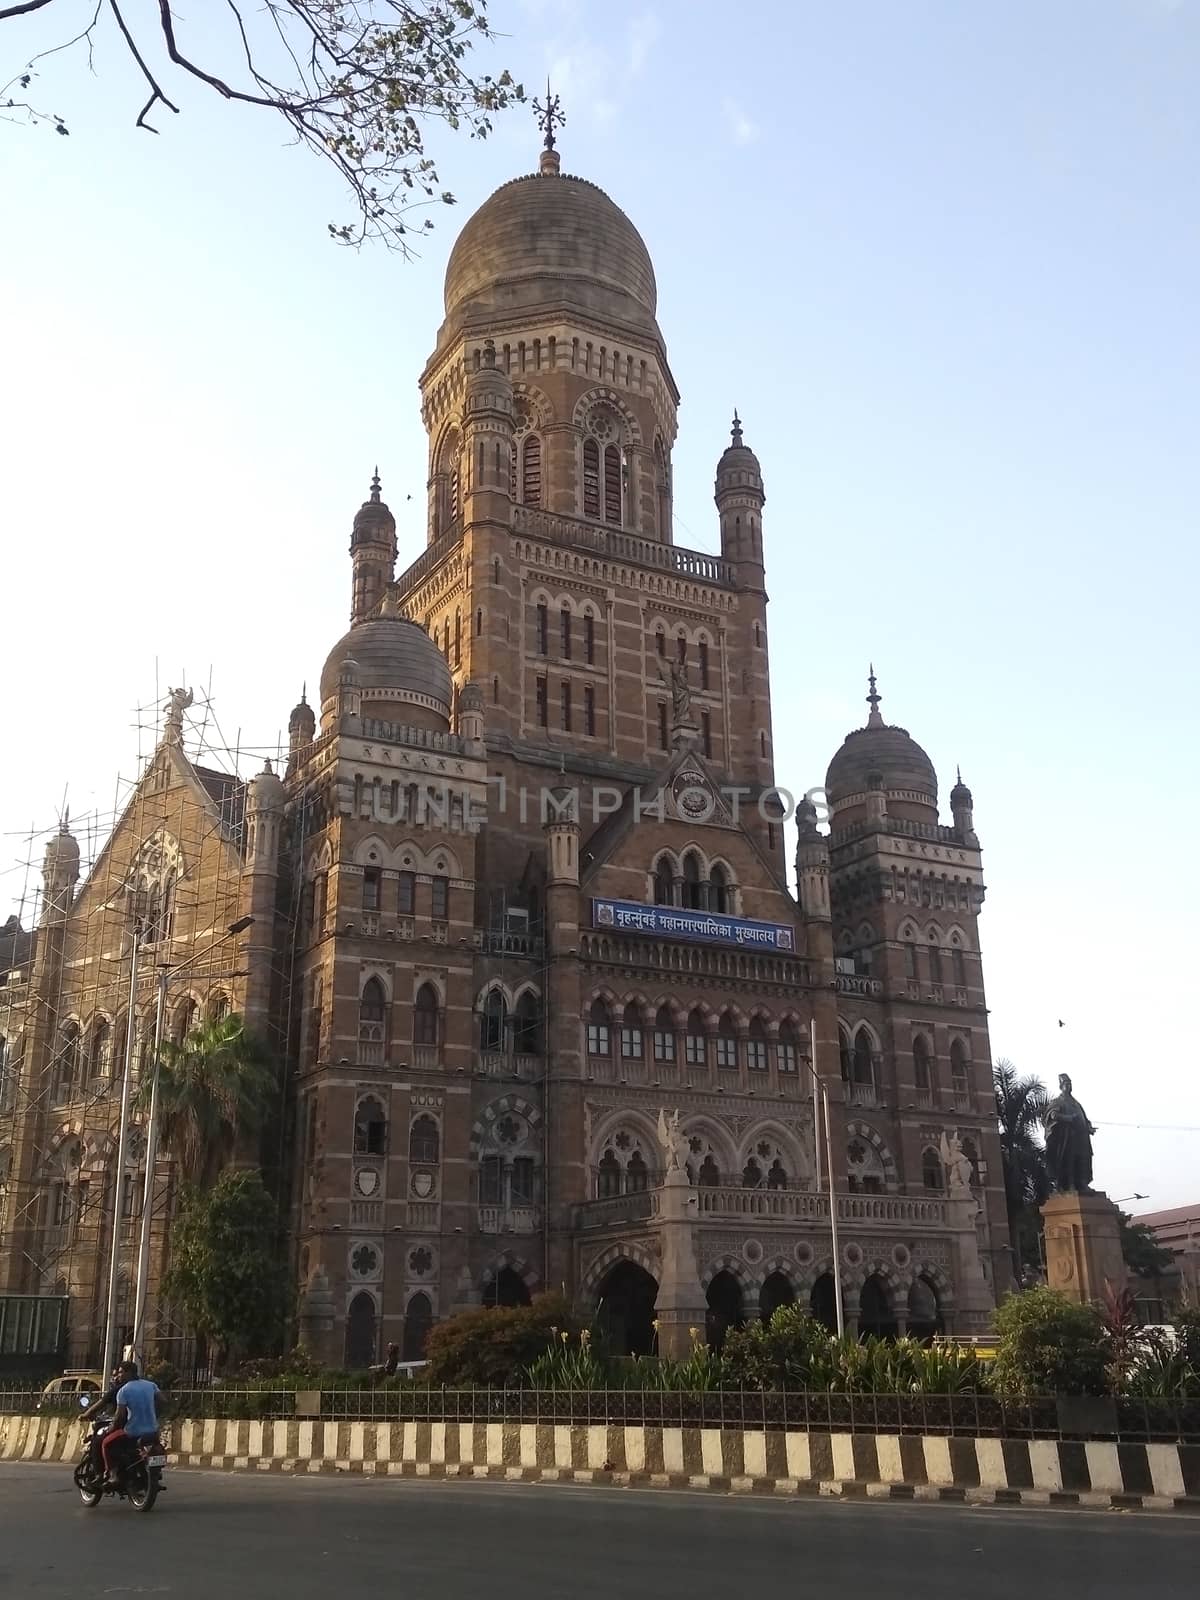 Mumbai headquarters, Fort, Mumbai, Maharashtra India. May-03-2019, tourist visiting (only outside area) for looking and enjoying the architecture of headquarters visit the place.